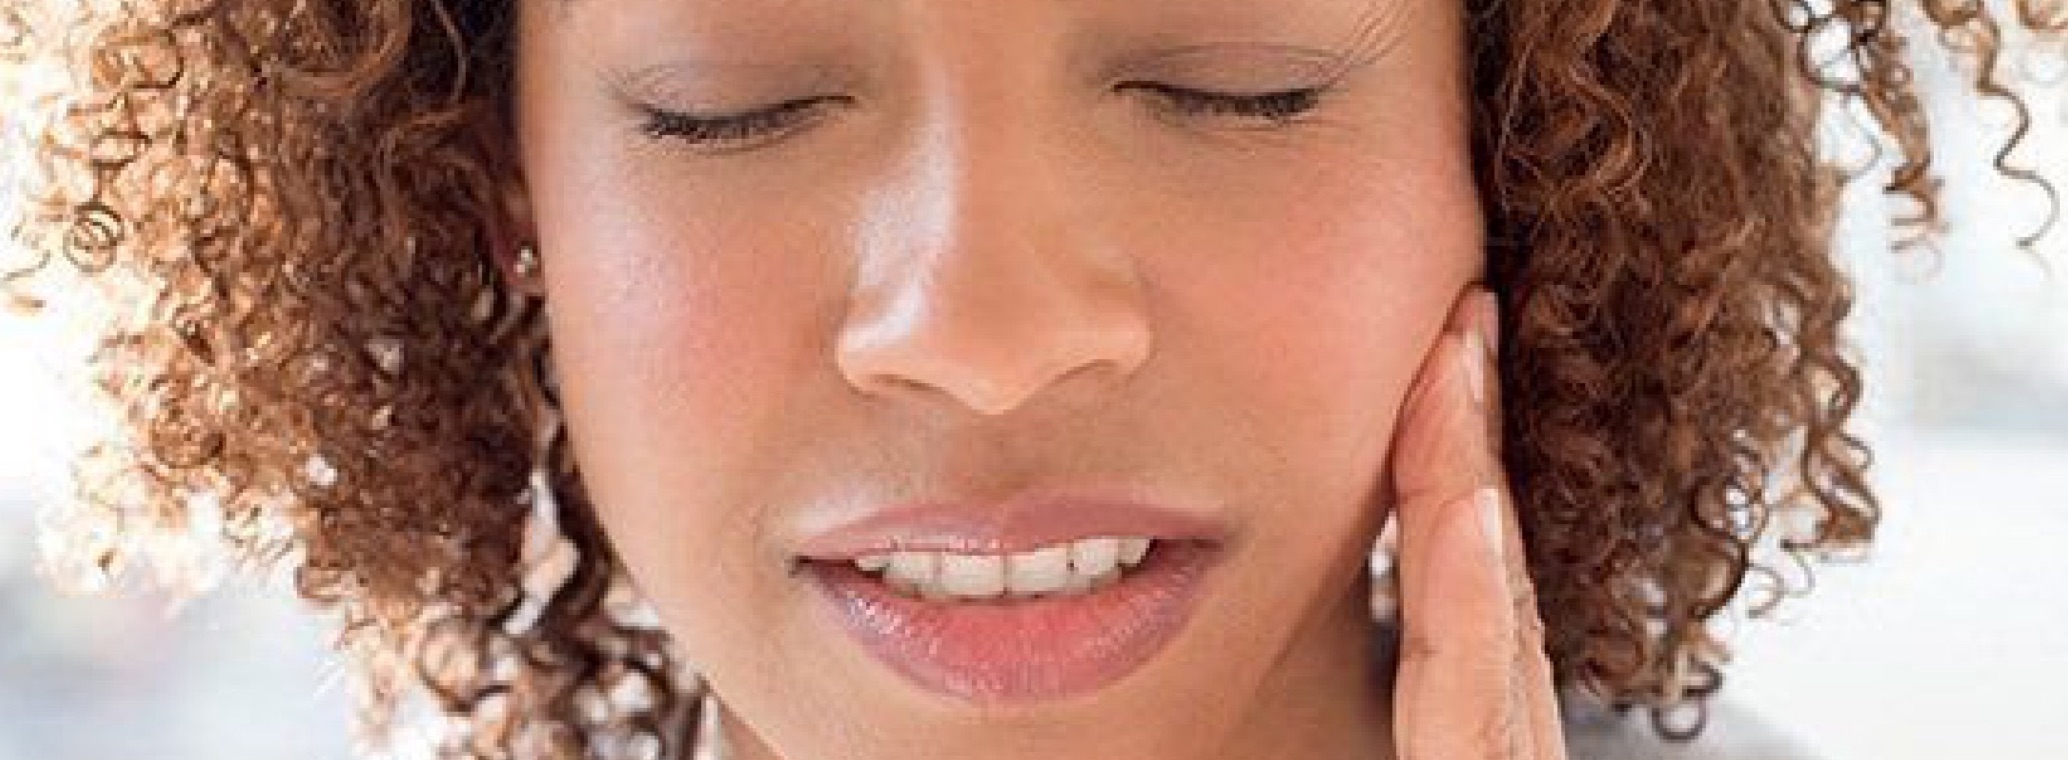 Tooth Pain and Sensitivity